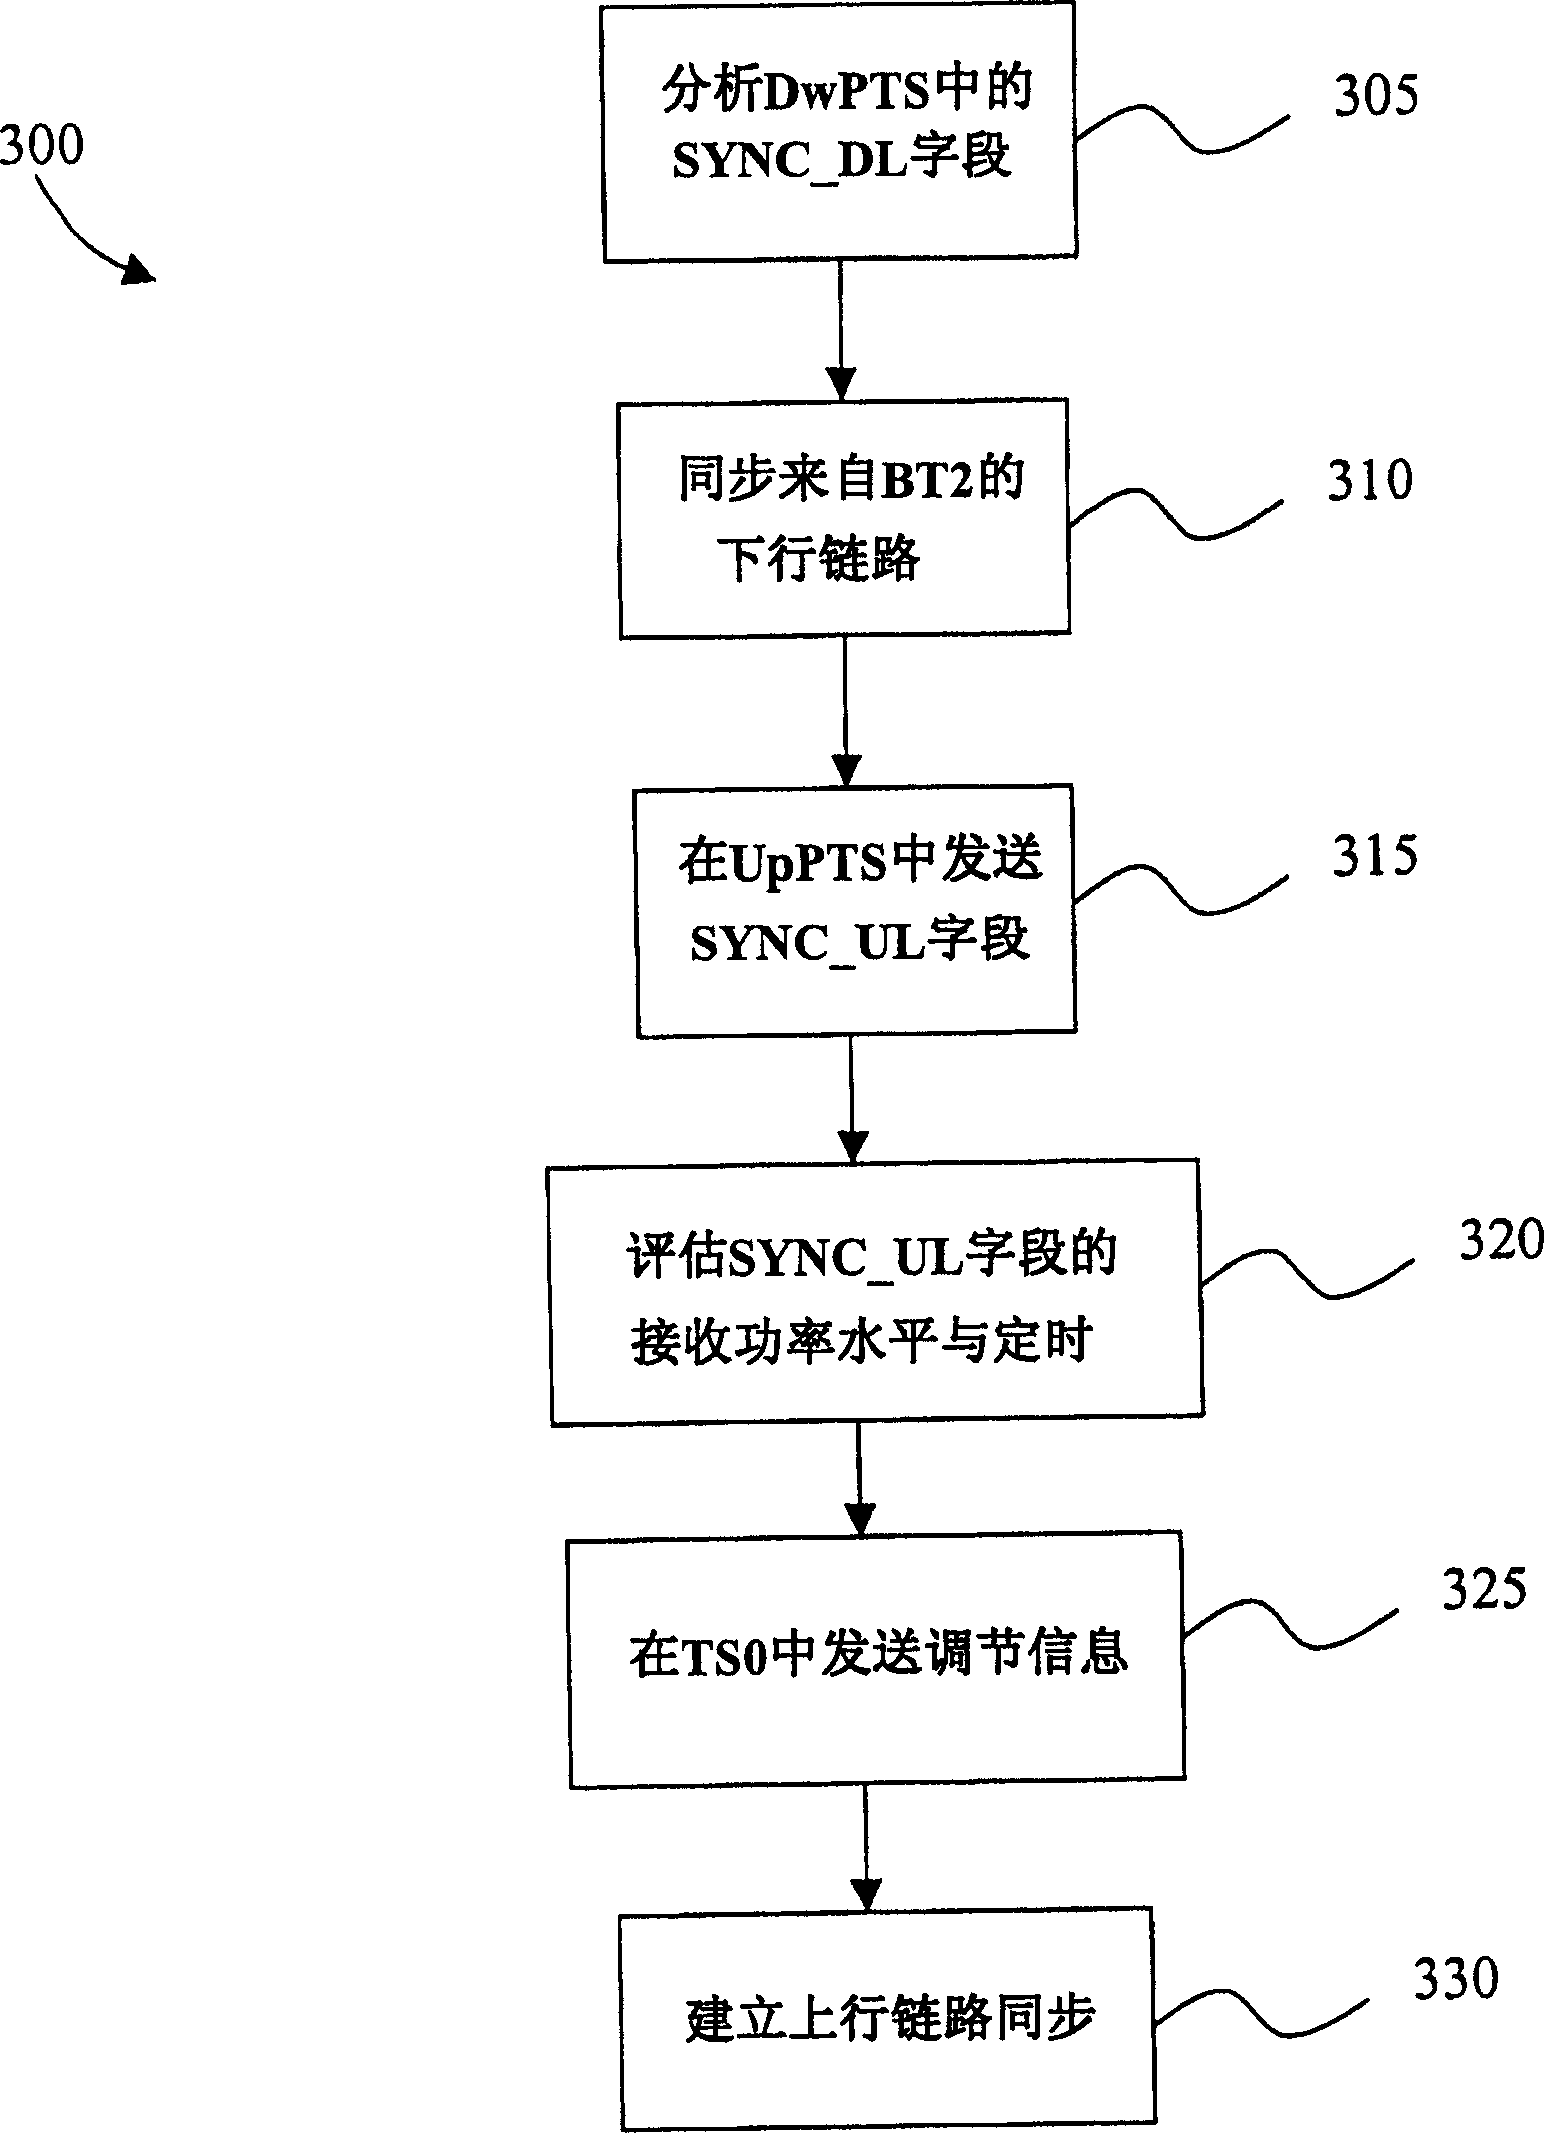 Method and system for synchronizing up-link